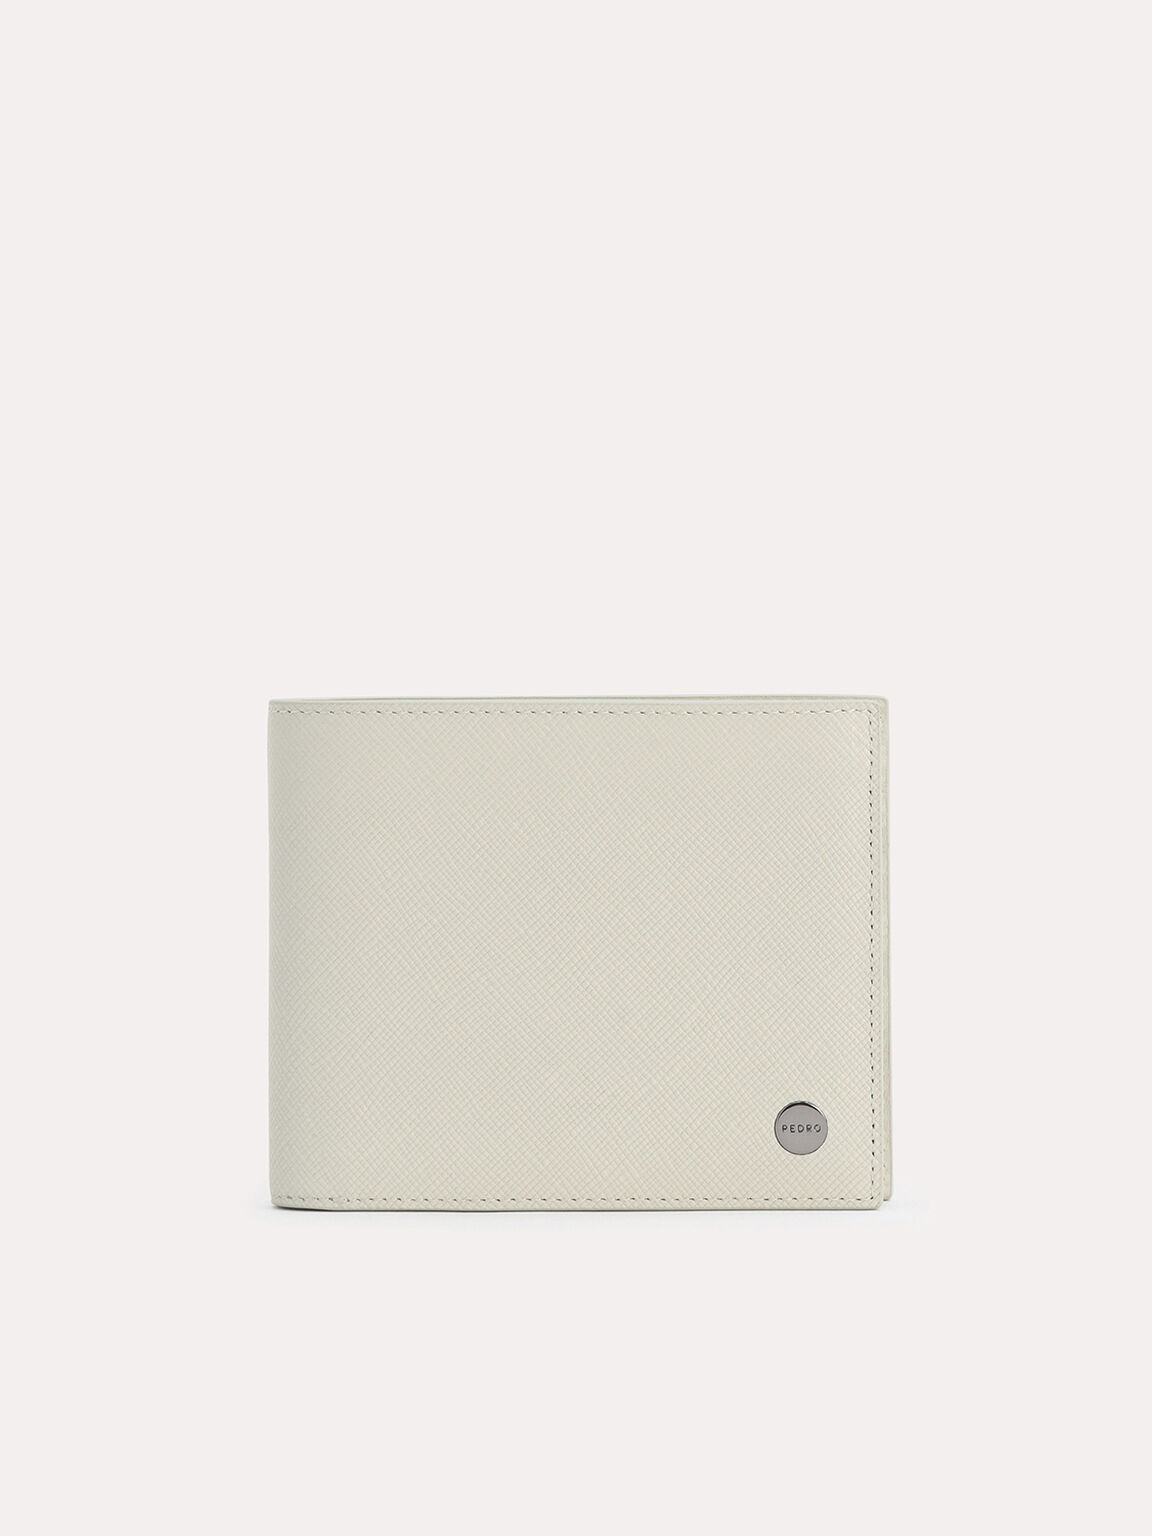 Oliver Textured Leather Bi-Fold Wallet with Insert, Chalk